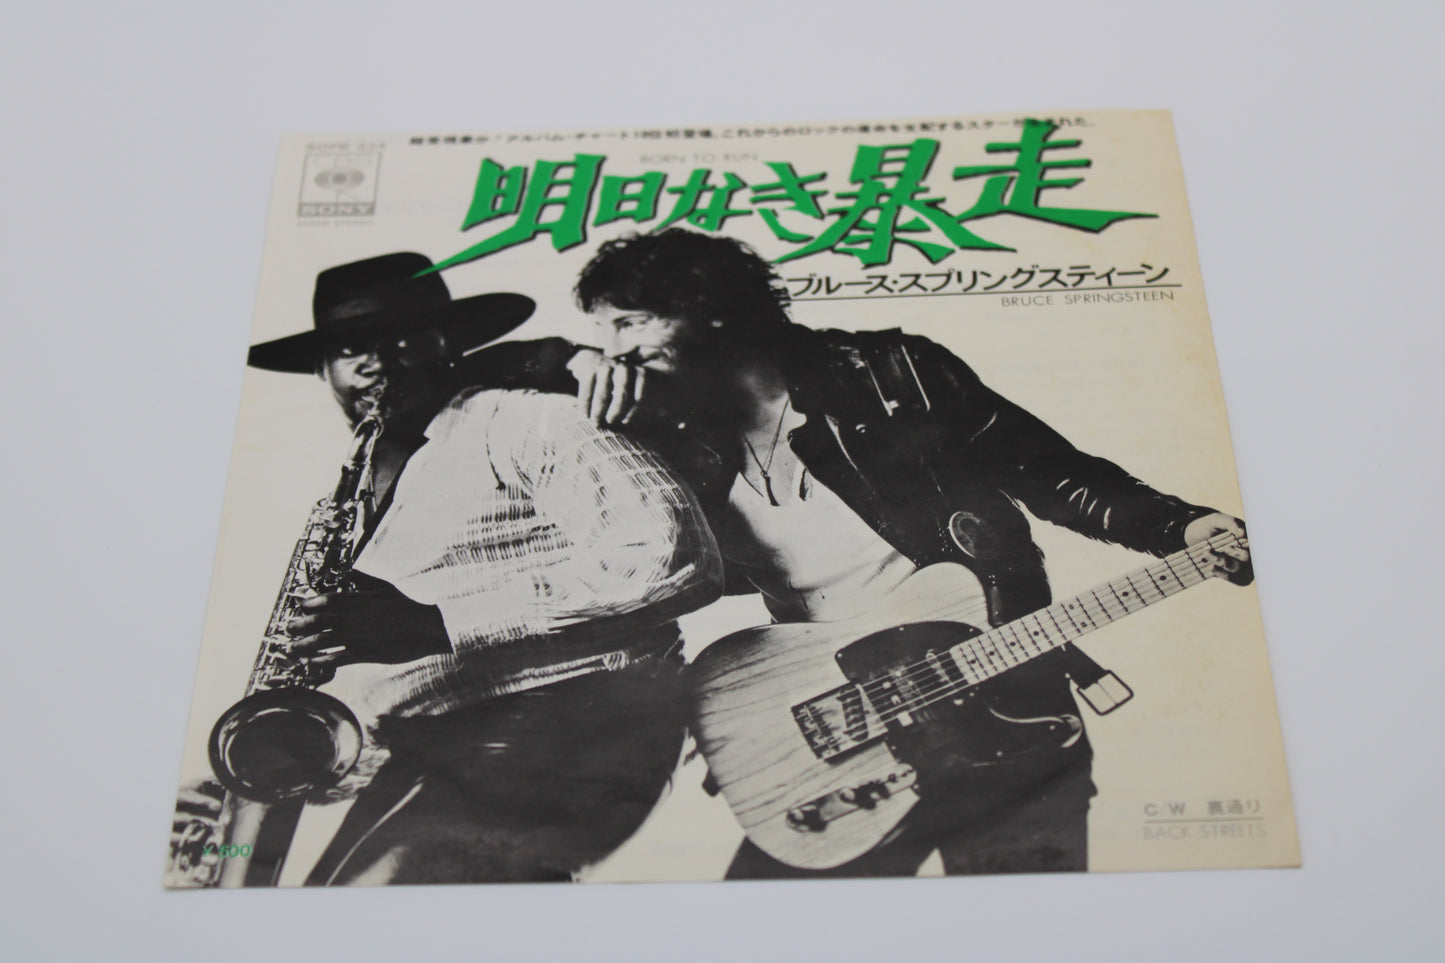 Bruce Springsteen 明日なき暴走 = Born To Run 45 record w/blue jacket - Japan Release 1975 Collectible